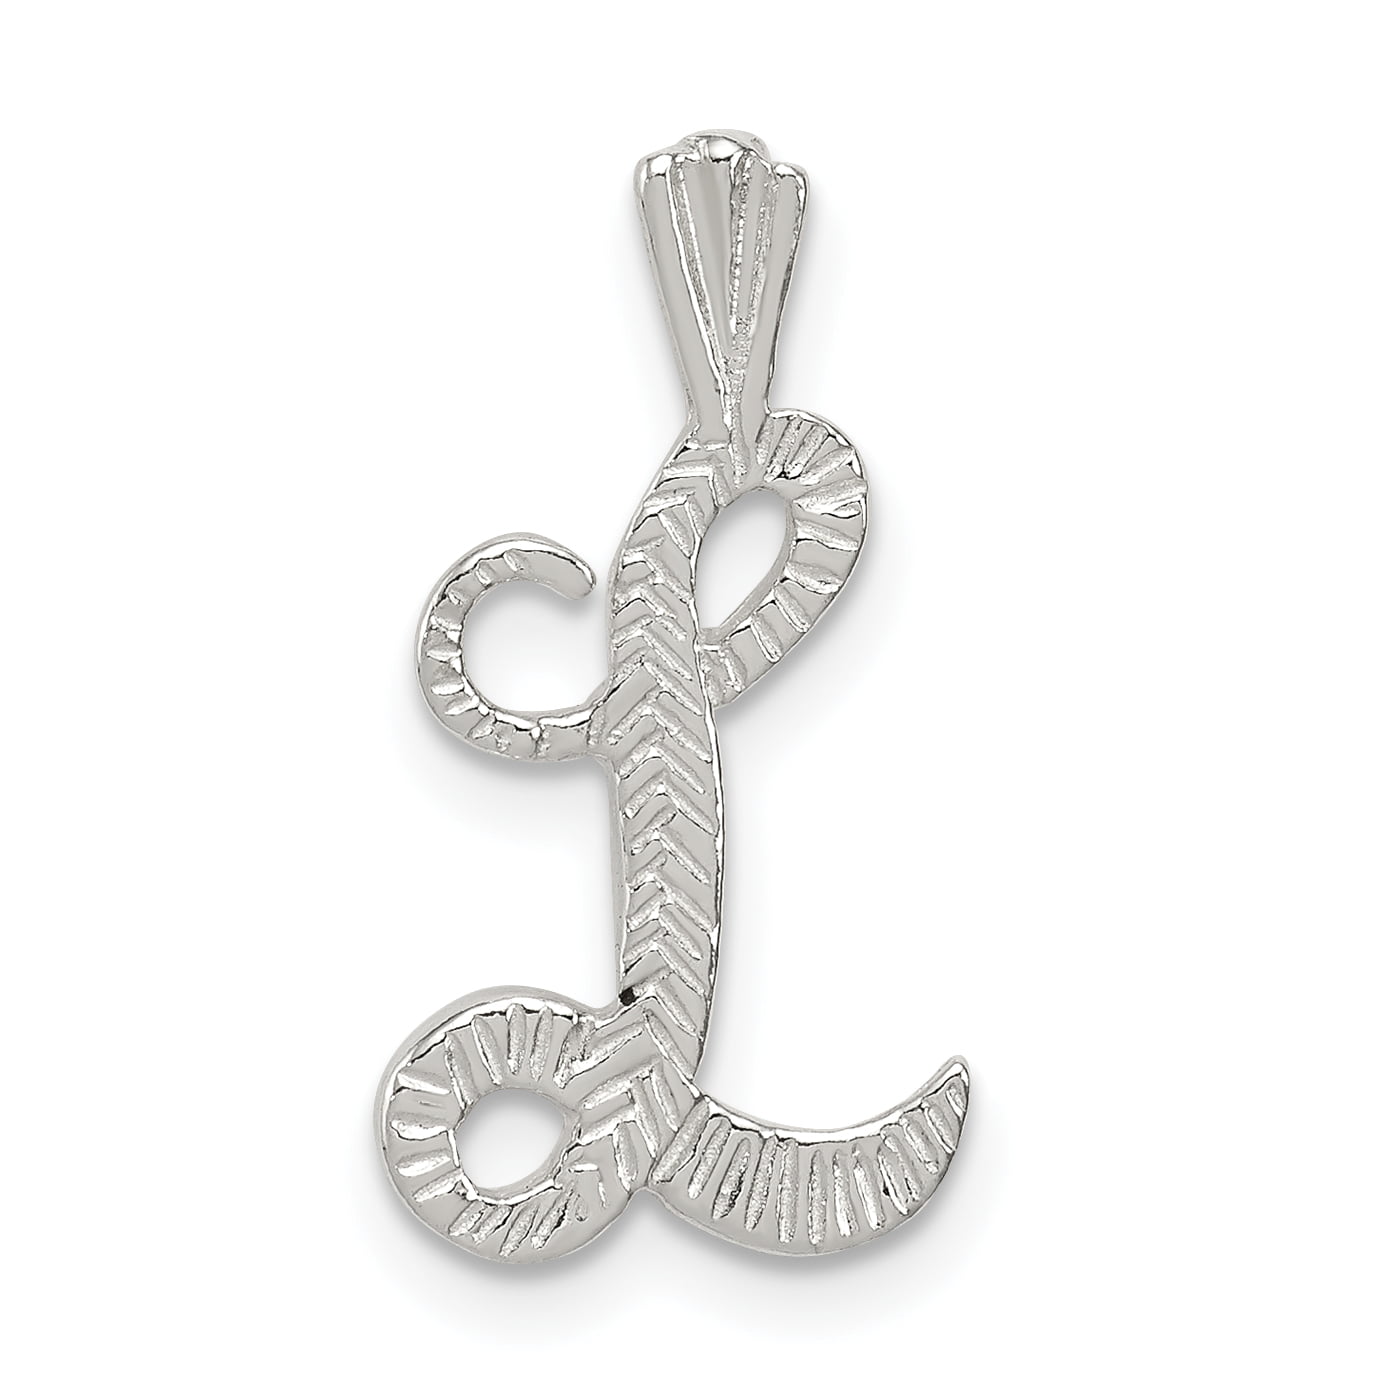 Solid 925 Sterling Silver Polished & Textured Letter A Chain Slide Pendant